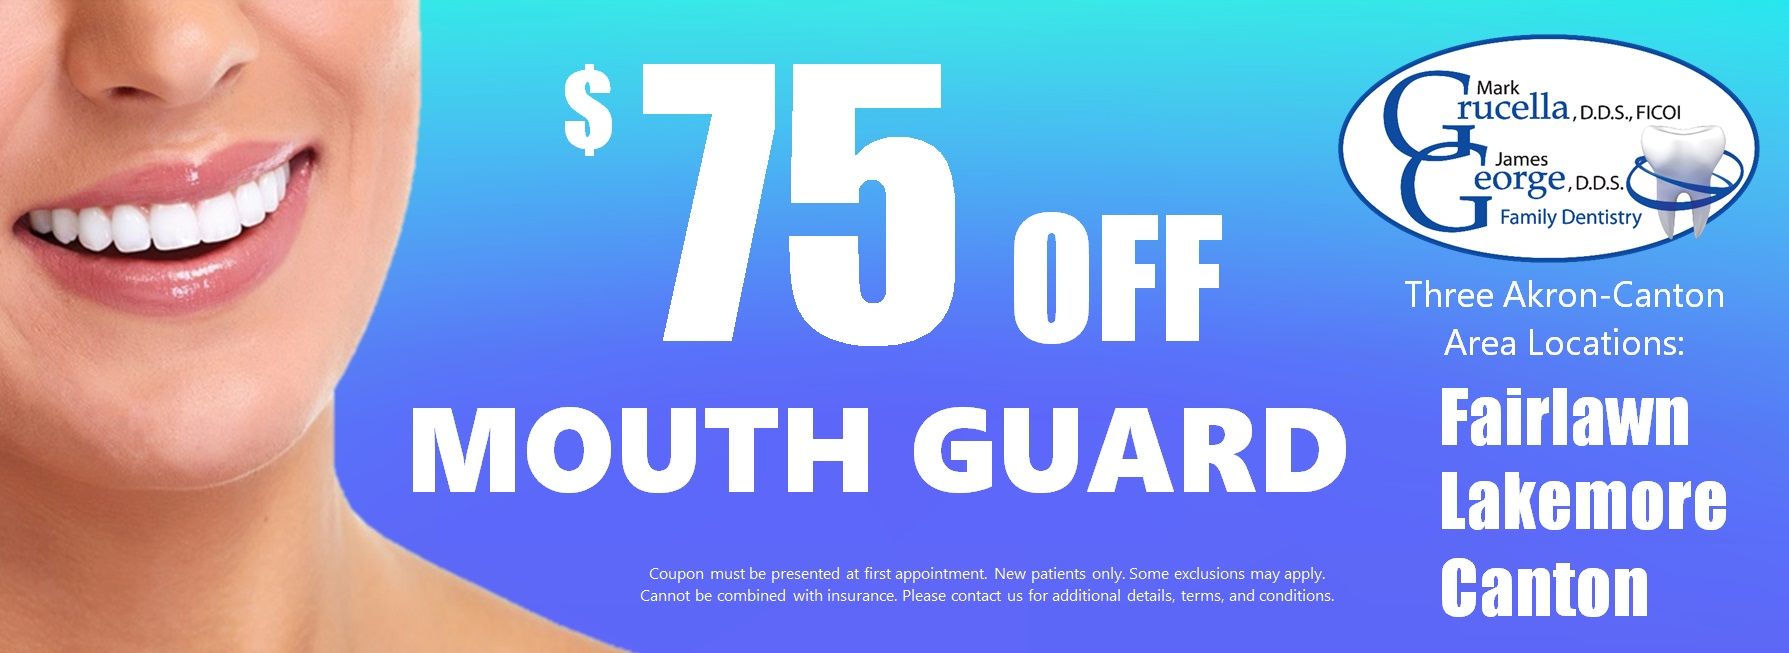 $75 OFF Mouth Guard